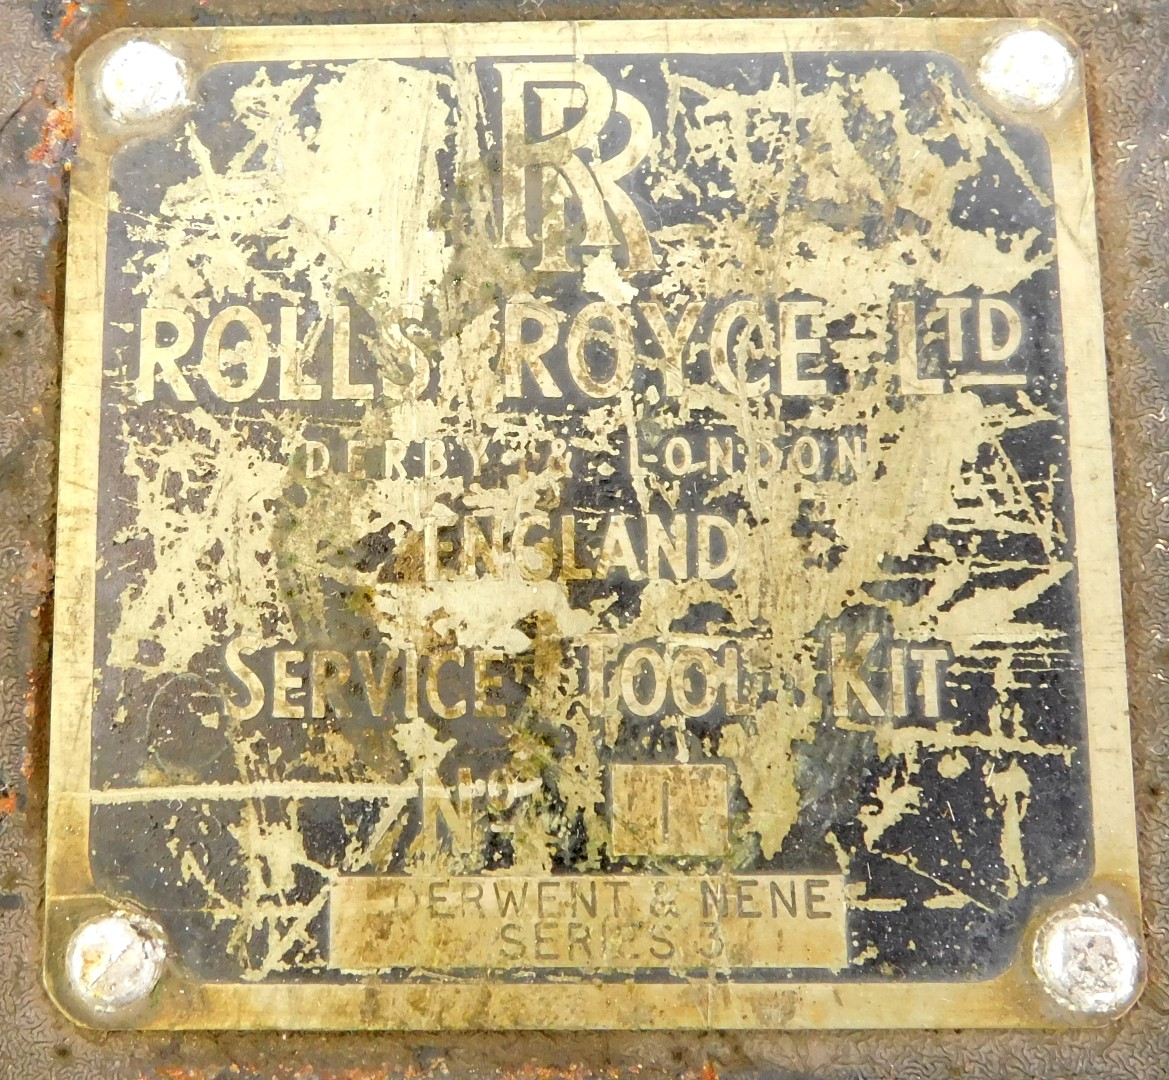 A Rolls Royce Service tool kit and contents, bearing plaque to front Rolls Royce Ltd Service Kit, - Image 3 of 3